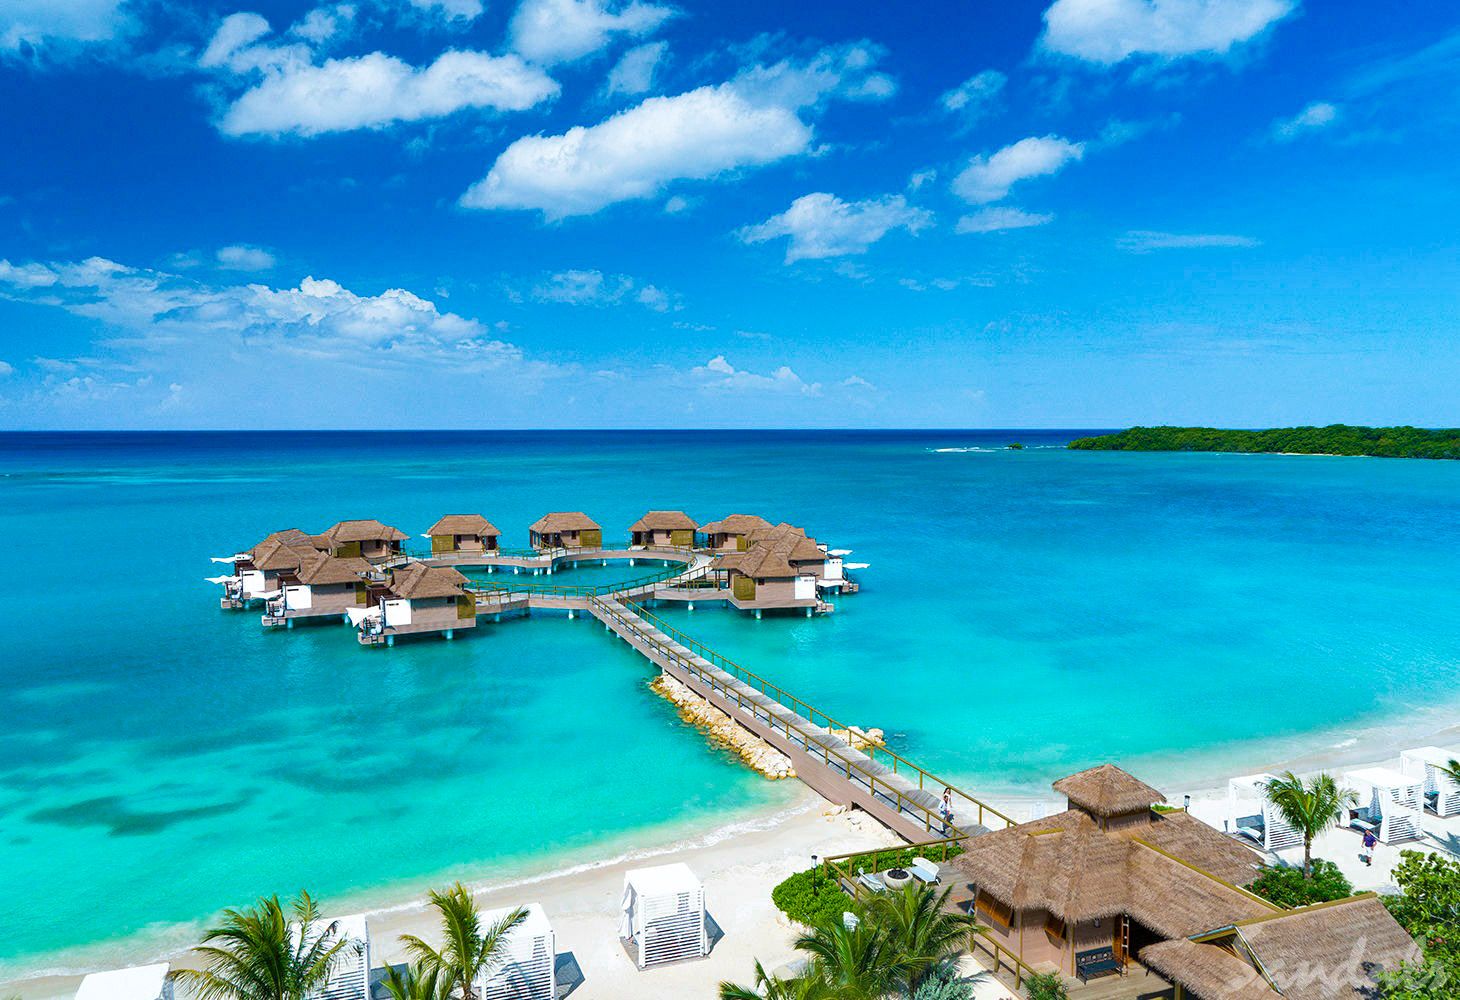 5 Excellent Reasons Sandals Resorts Are For Singles Too